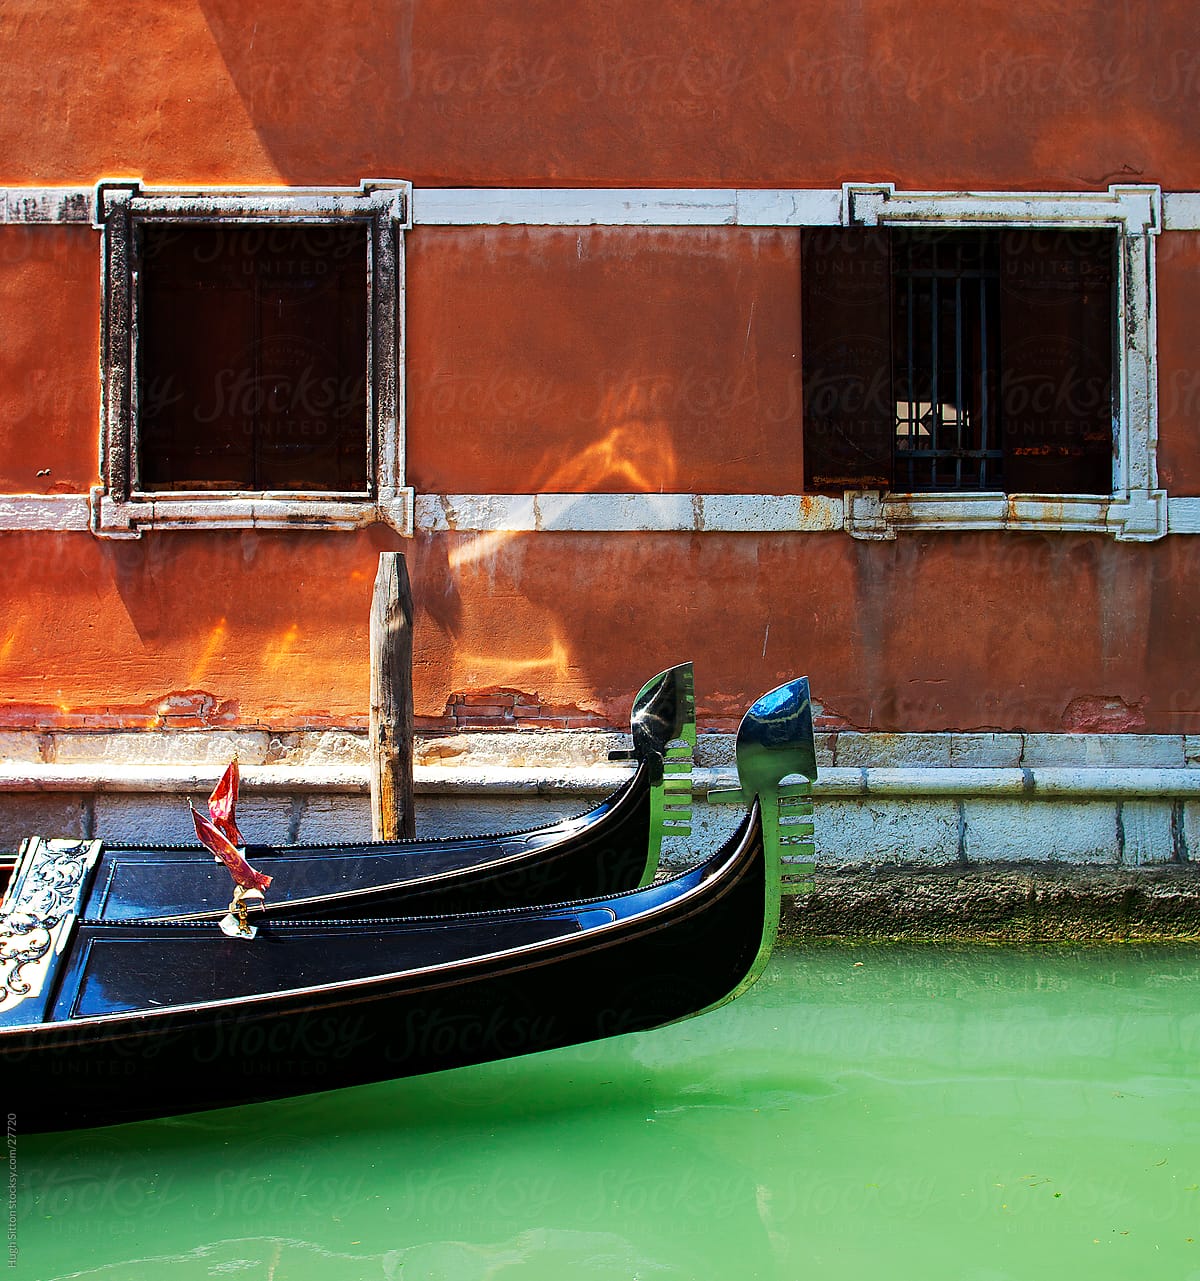 Gondola on the canals of Venice. Italy